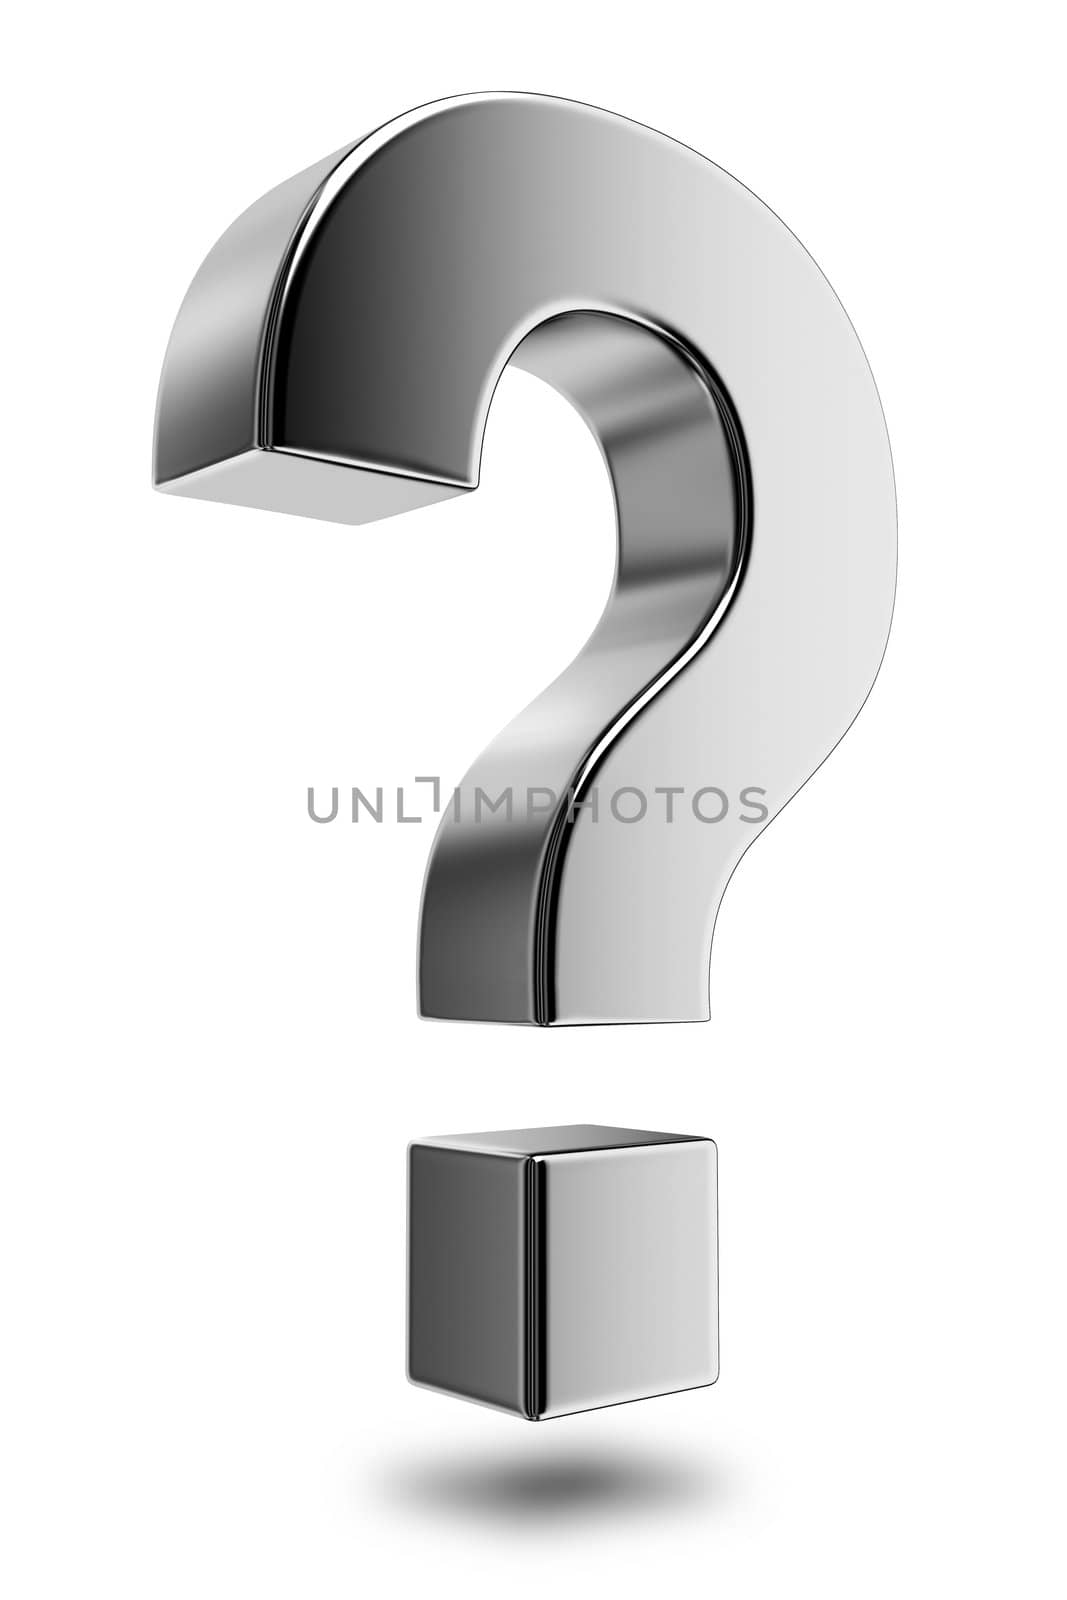 Metallic question mark. High resolution rendered in 3D.